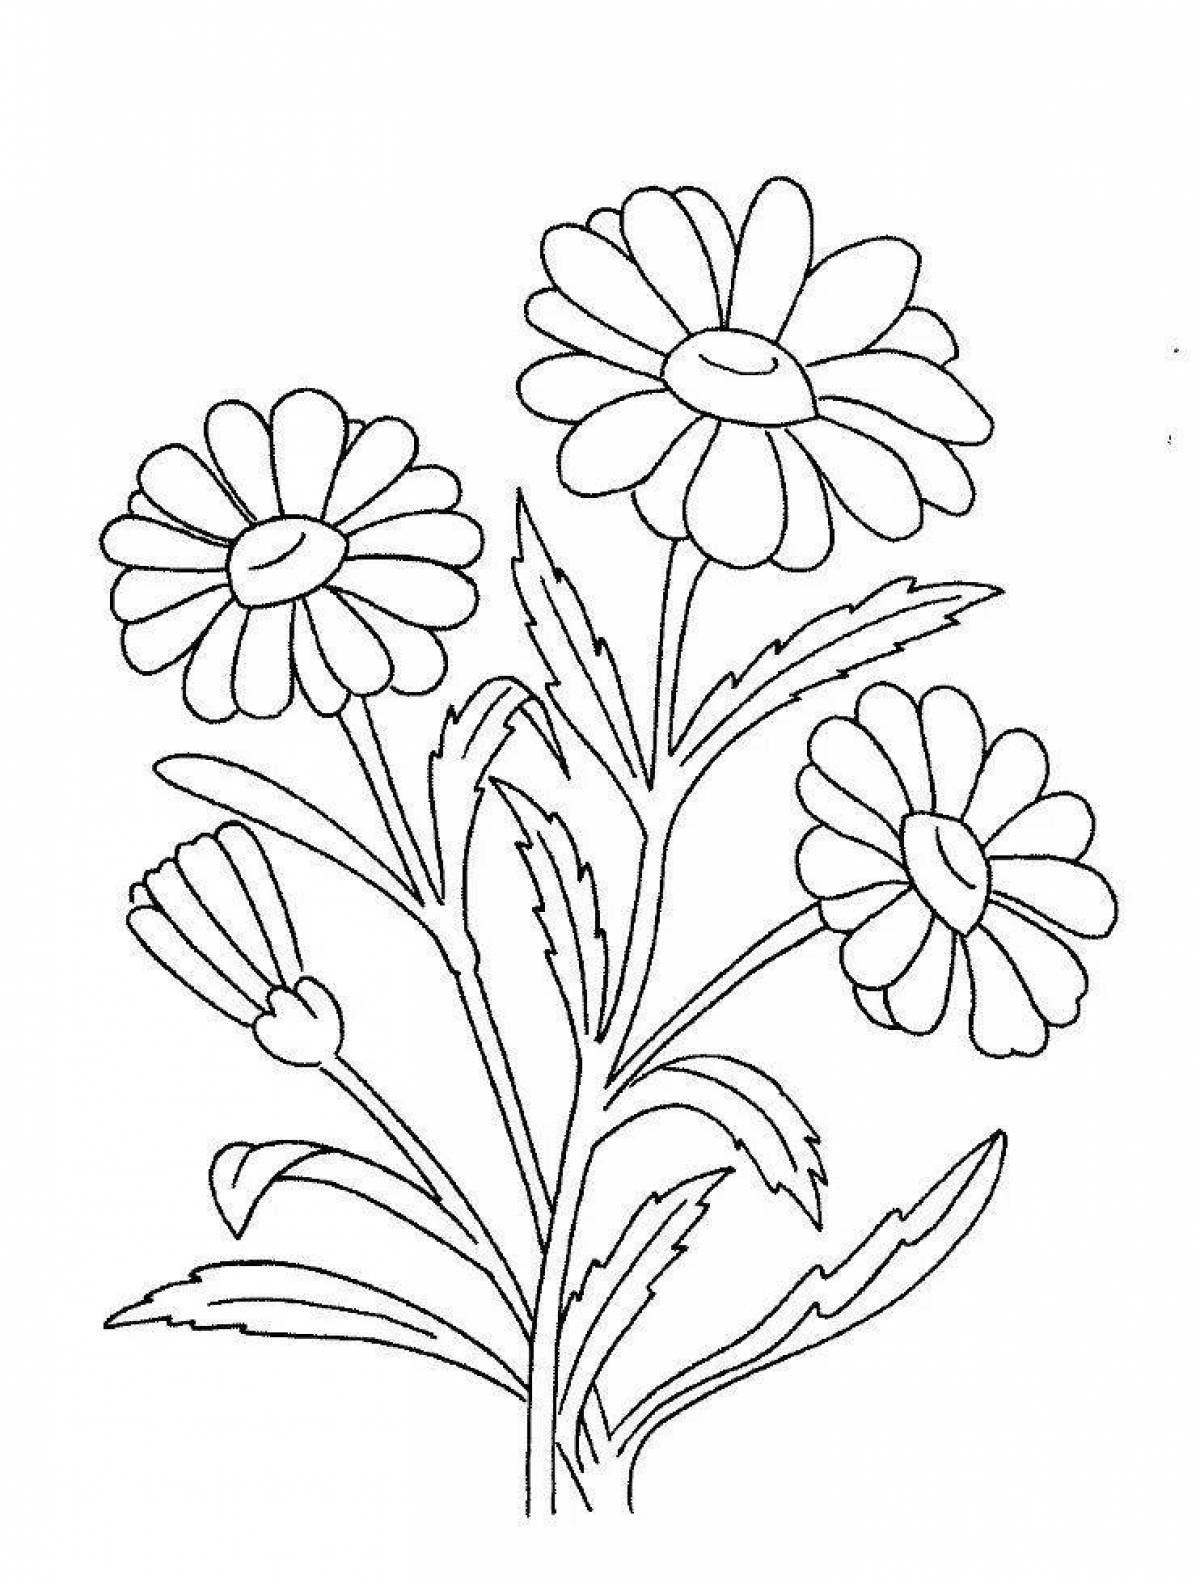 Coloring page captivating chamomile flowers